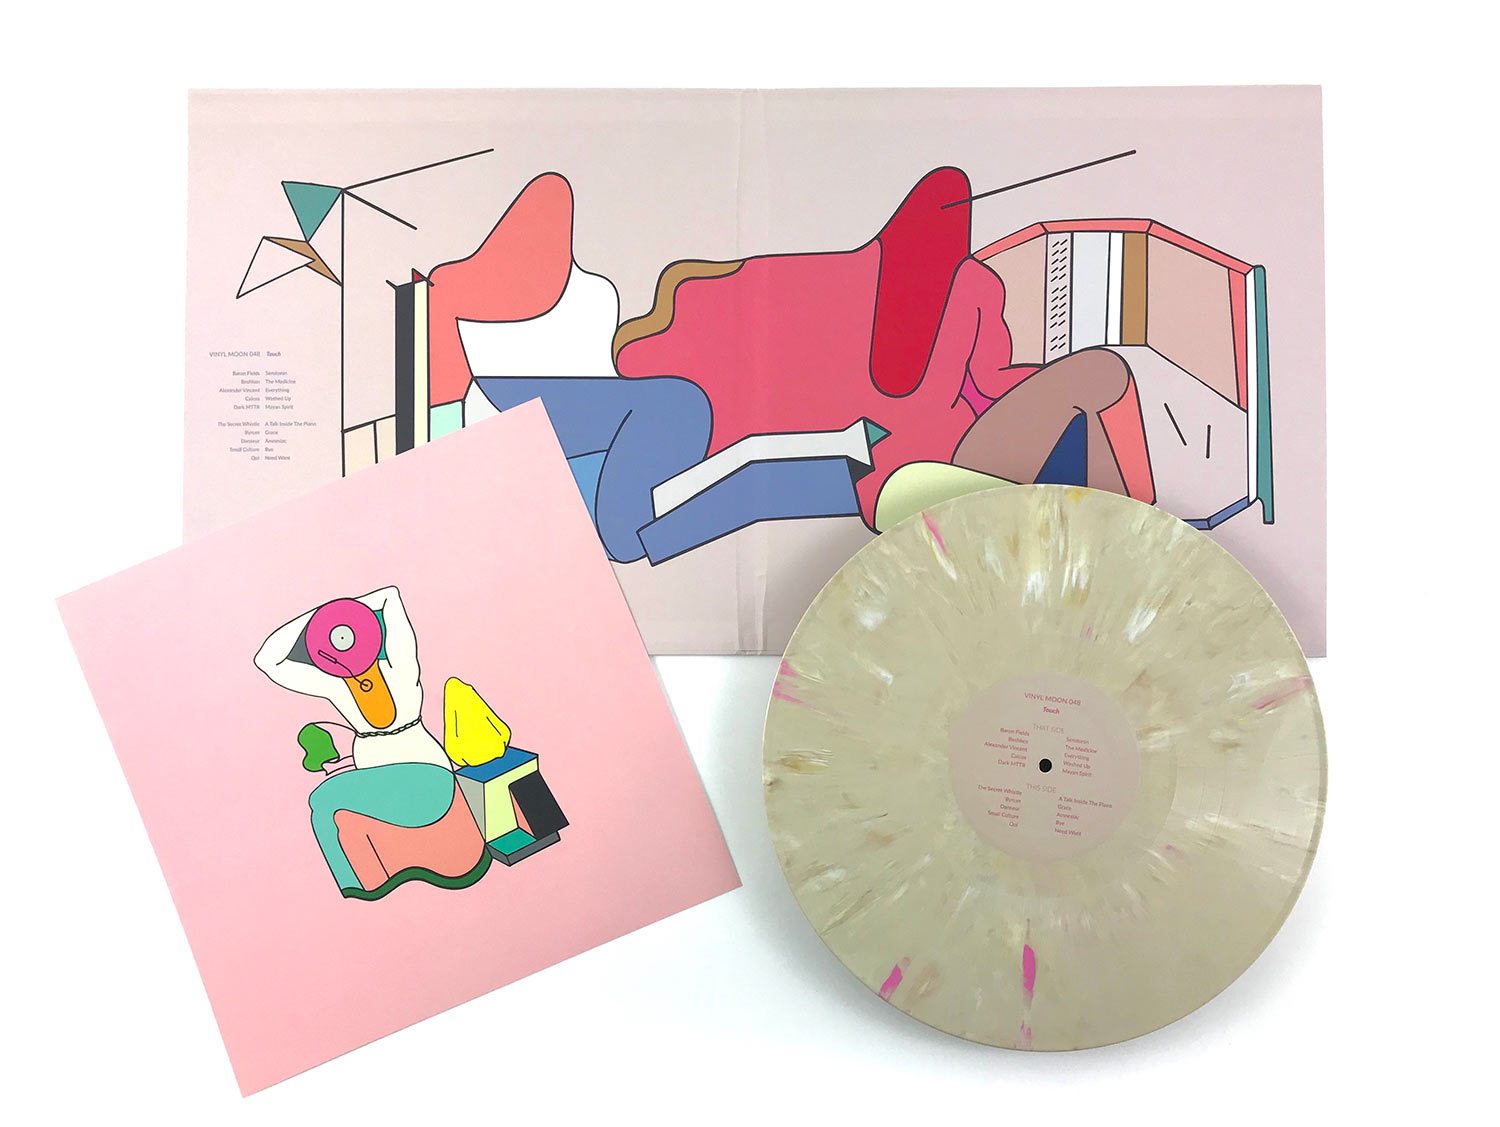 Image of a pink vinyl record and illustrated sleeve on a white surface